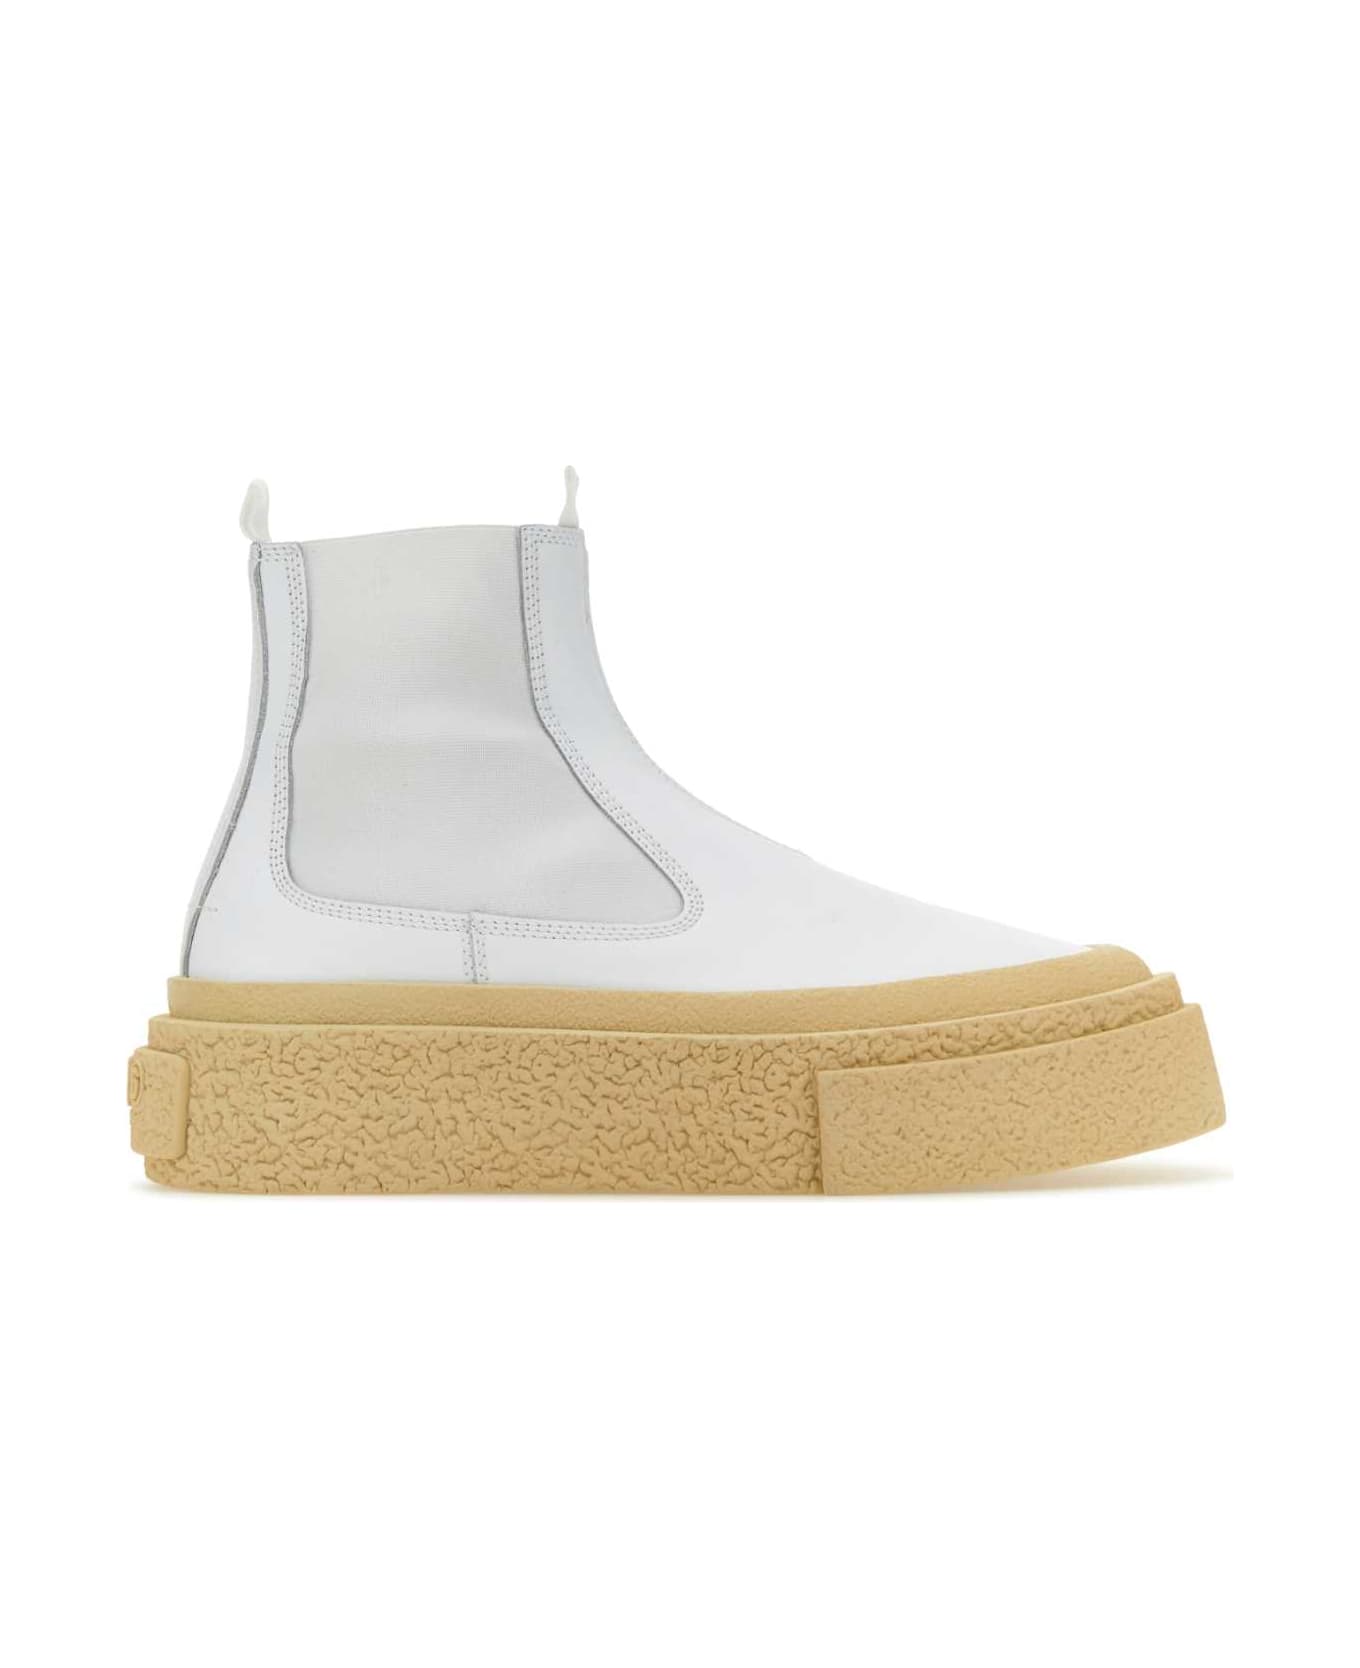 MM6 Maison Margiela White Leather Ankle Boots - BRIGHTWHITE